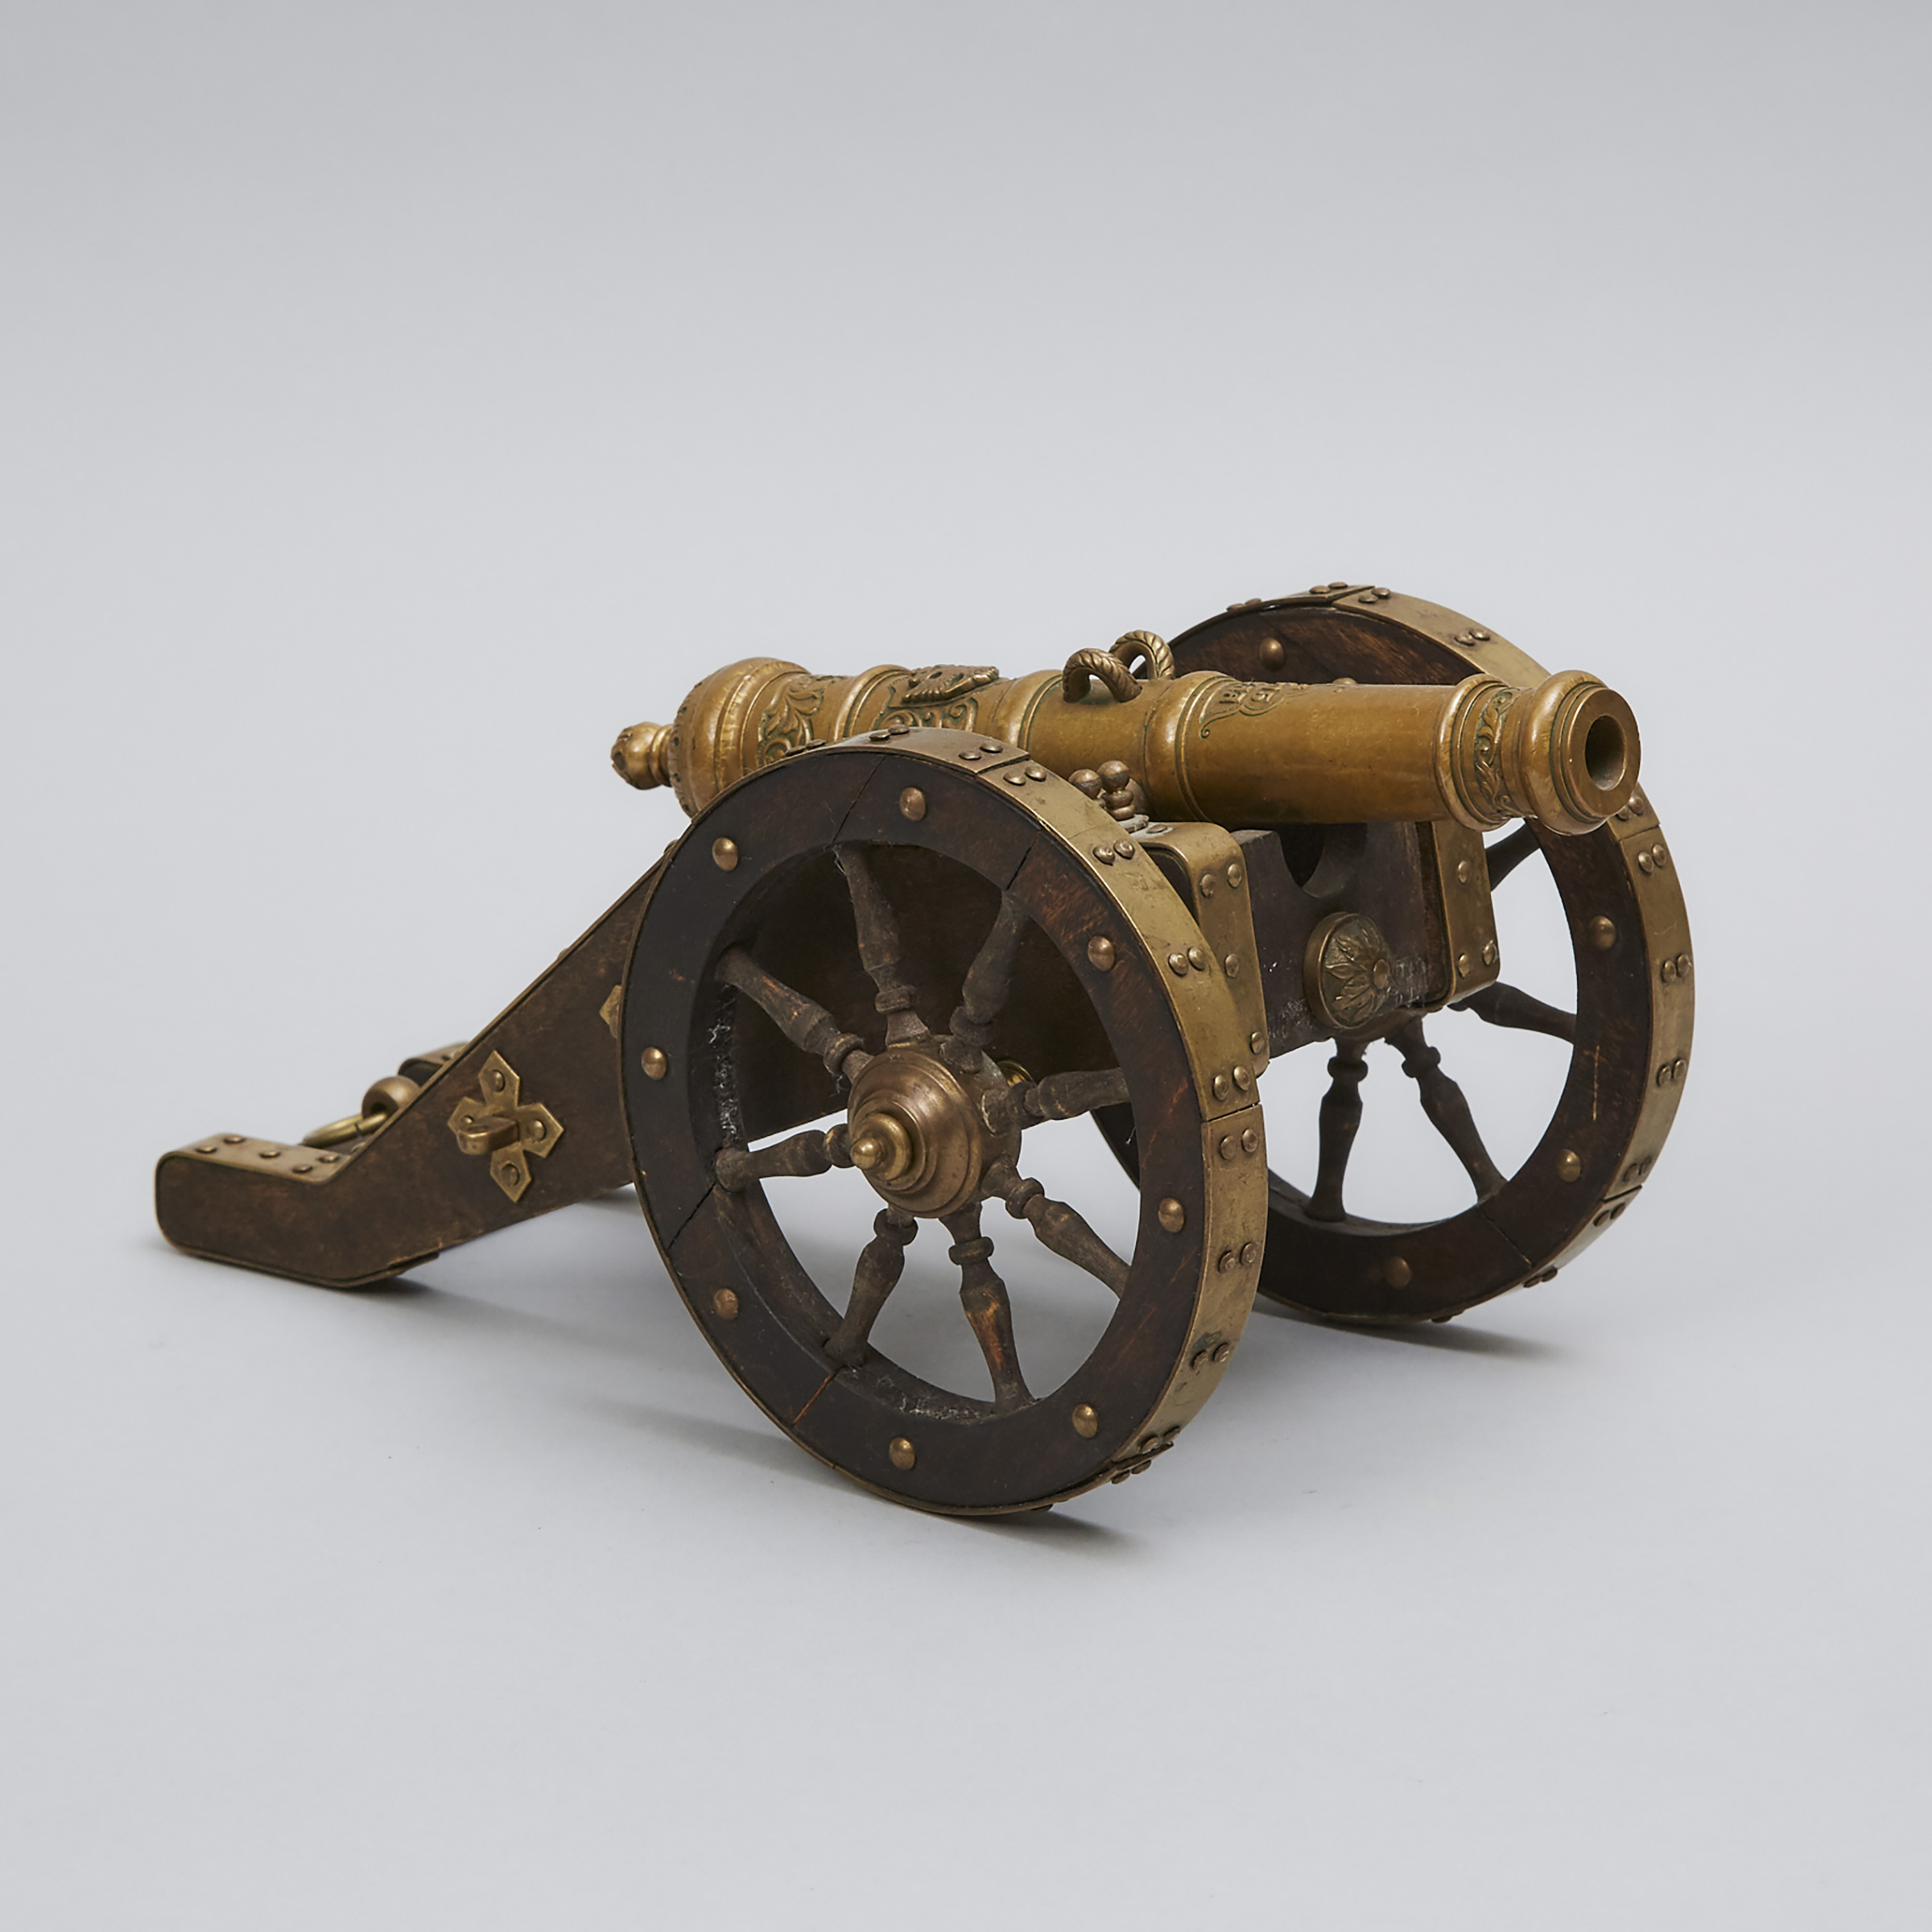 Model of a Napoleonic Russian Tula Arsenal Field Cannon, early-mid 20th century